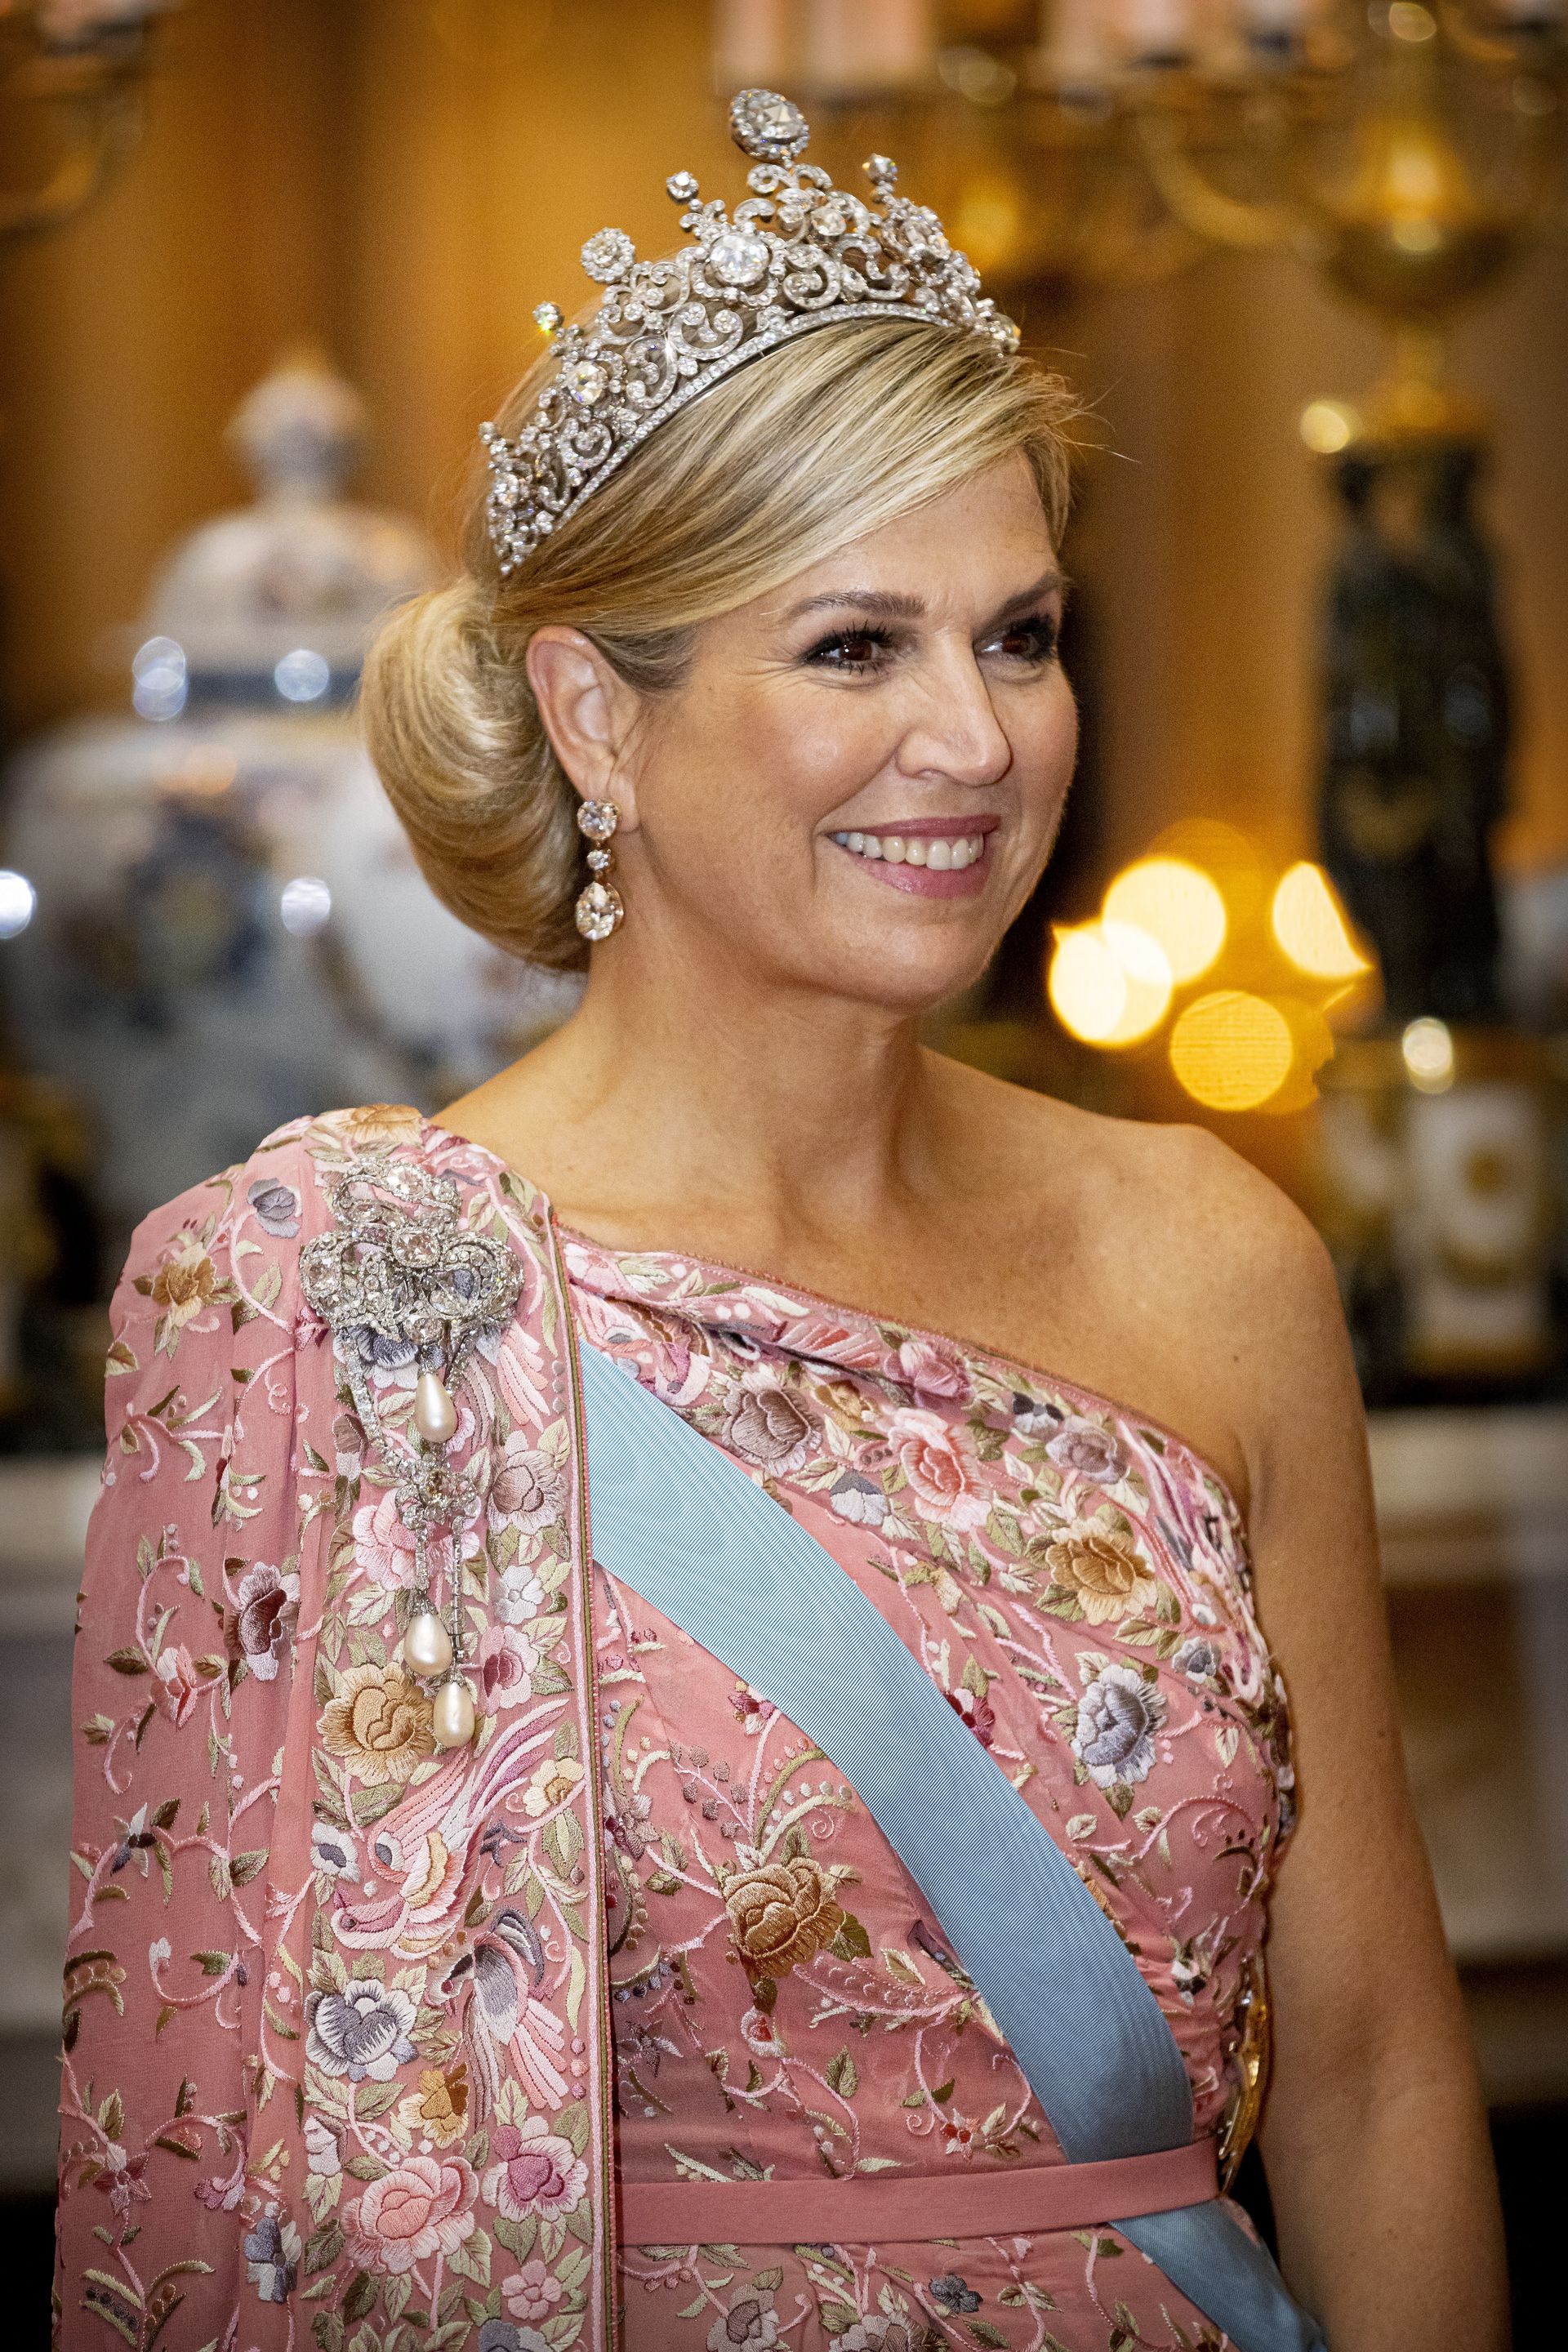 Queen Maxima State Bank of Sweden